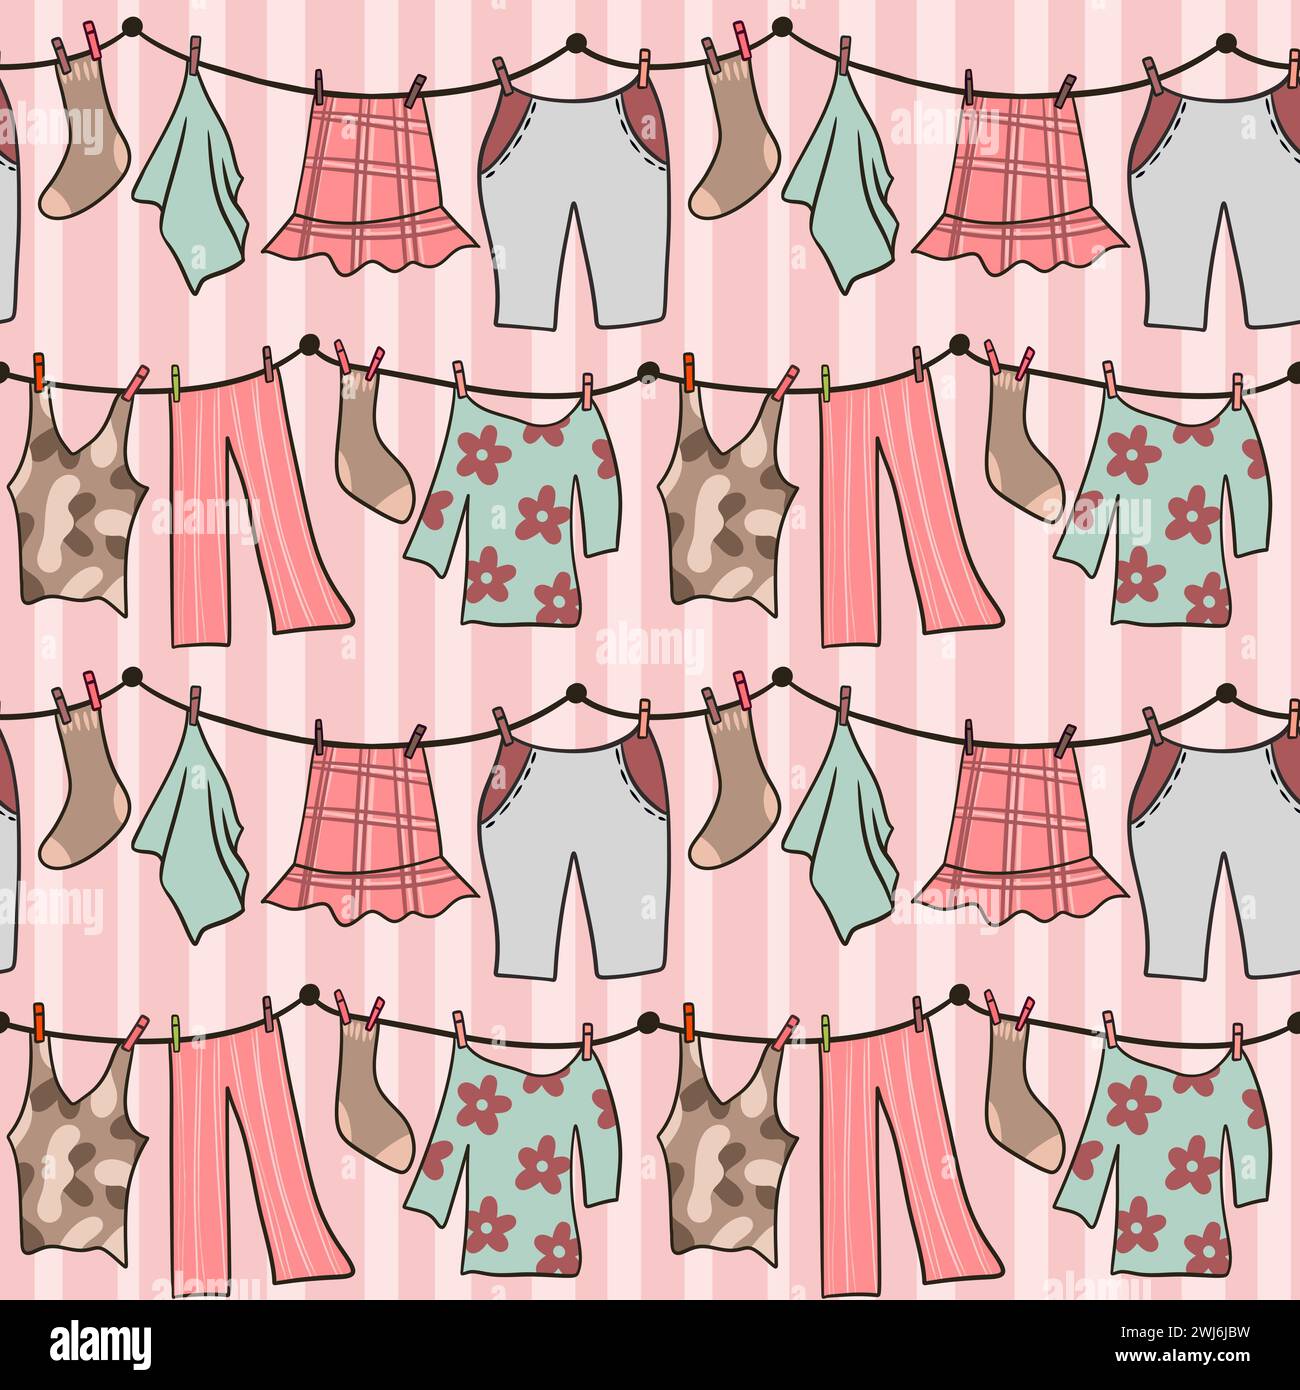 Hand drawn seamless pattern with pink pastel laundry clothesline hanging clothes. Dress pants socks on string line drying dry summer housework in beige orange green, cotton fabric fashion background Stock Photo